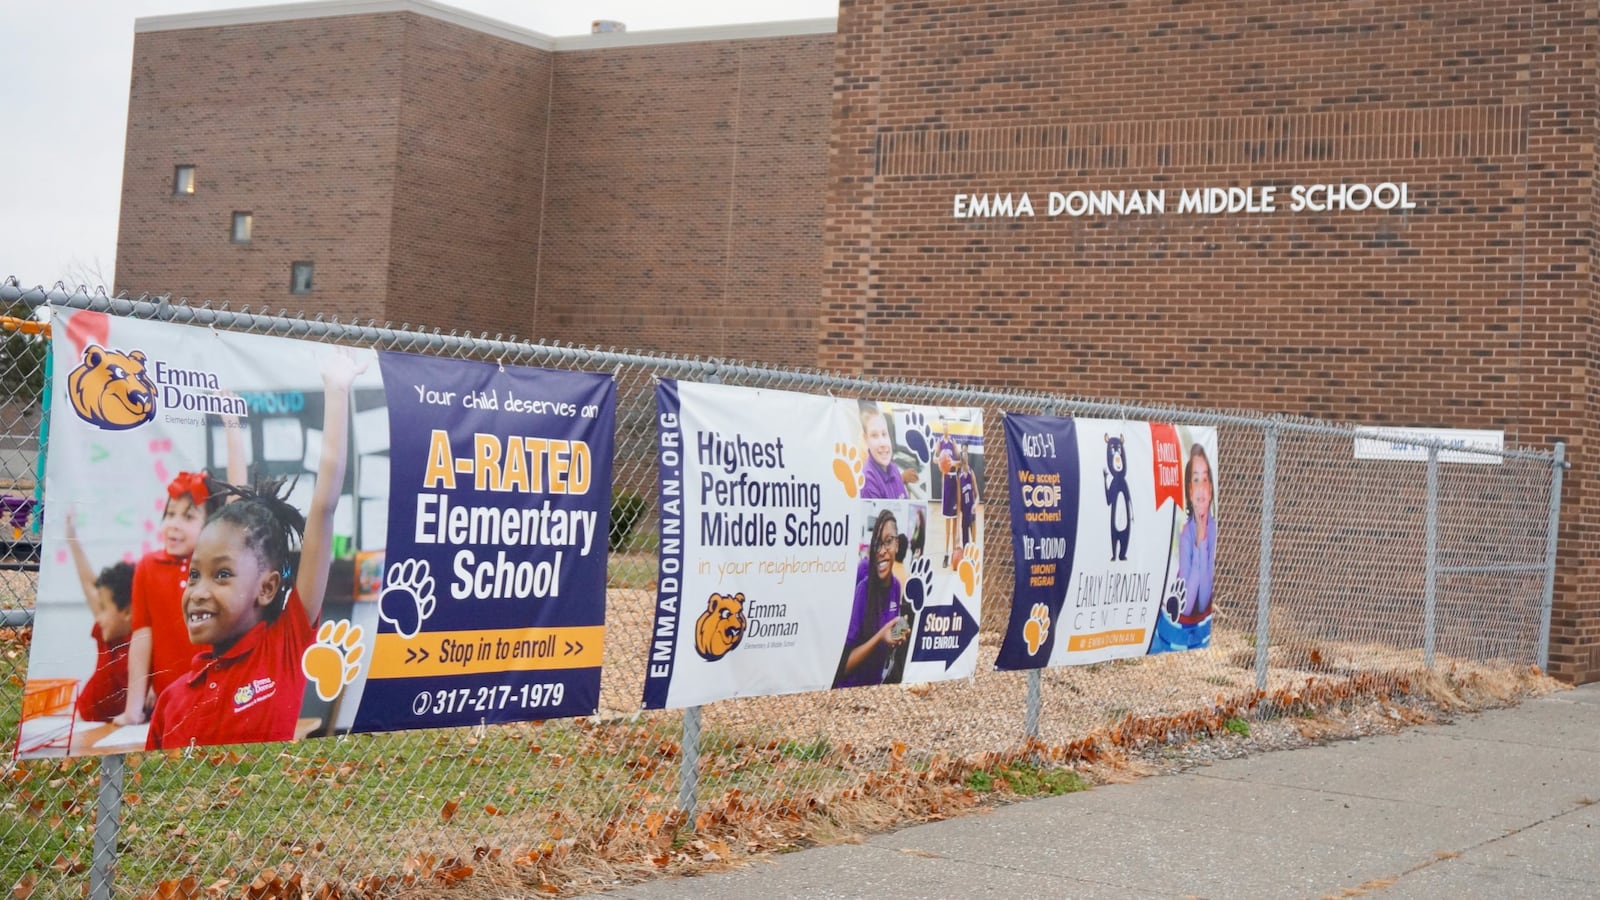 Emma Donnan Elementary and Middle School